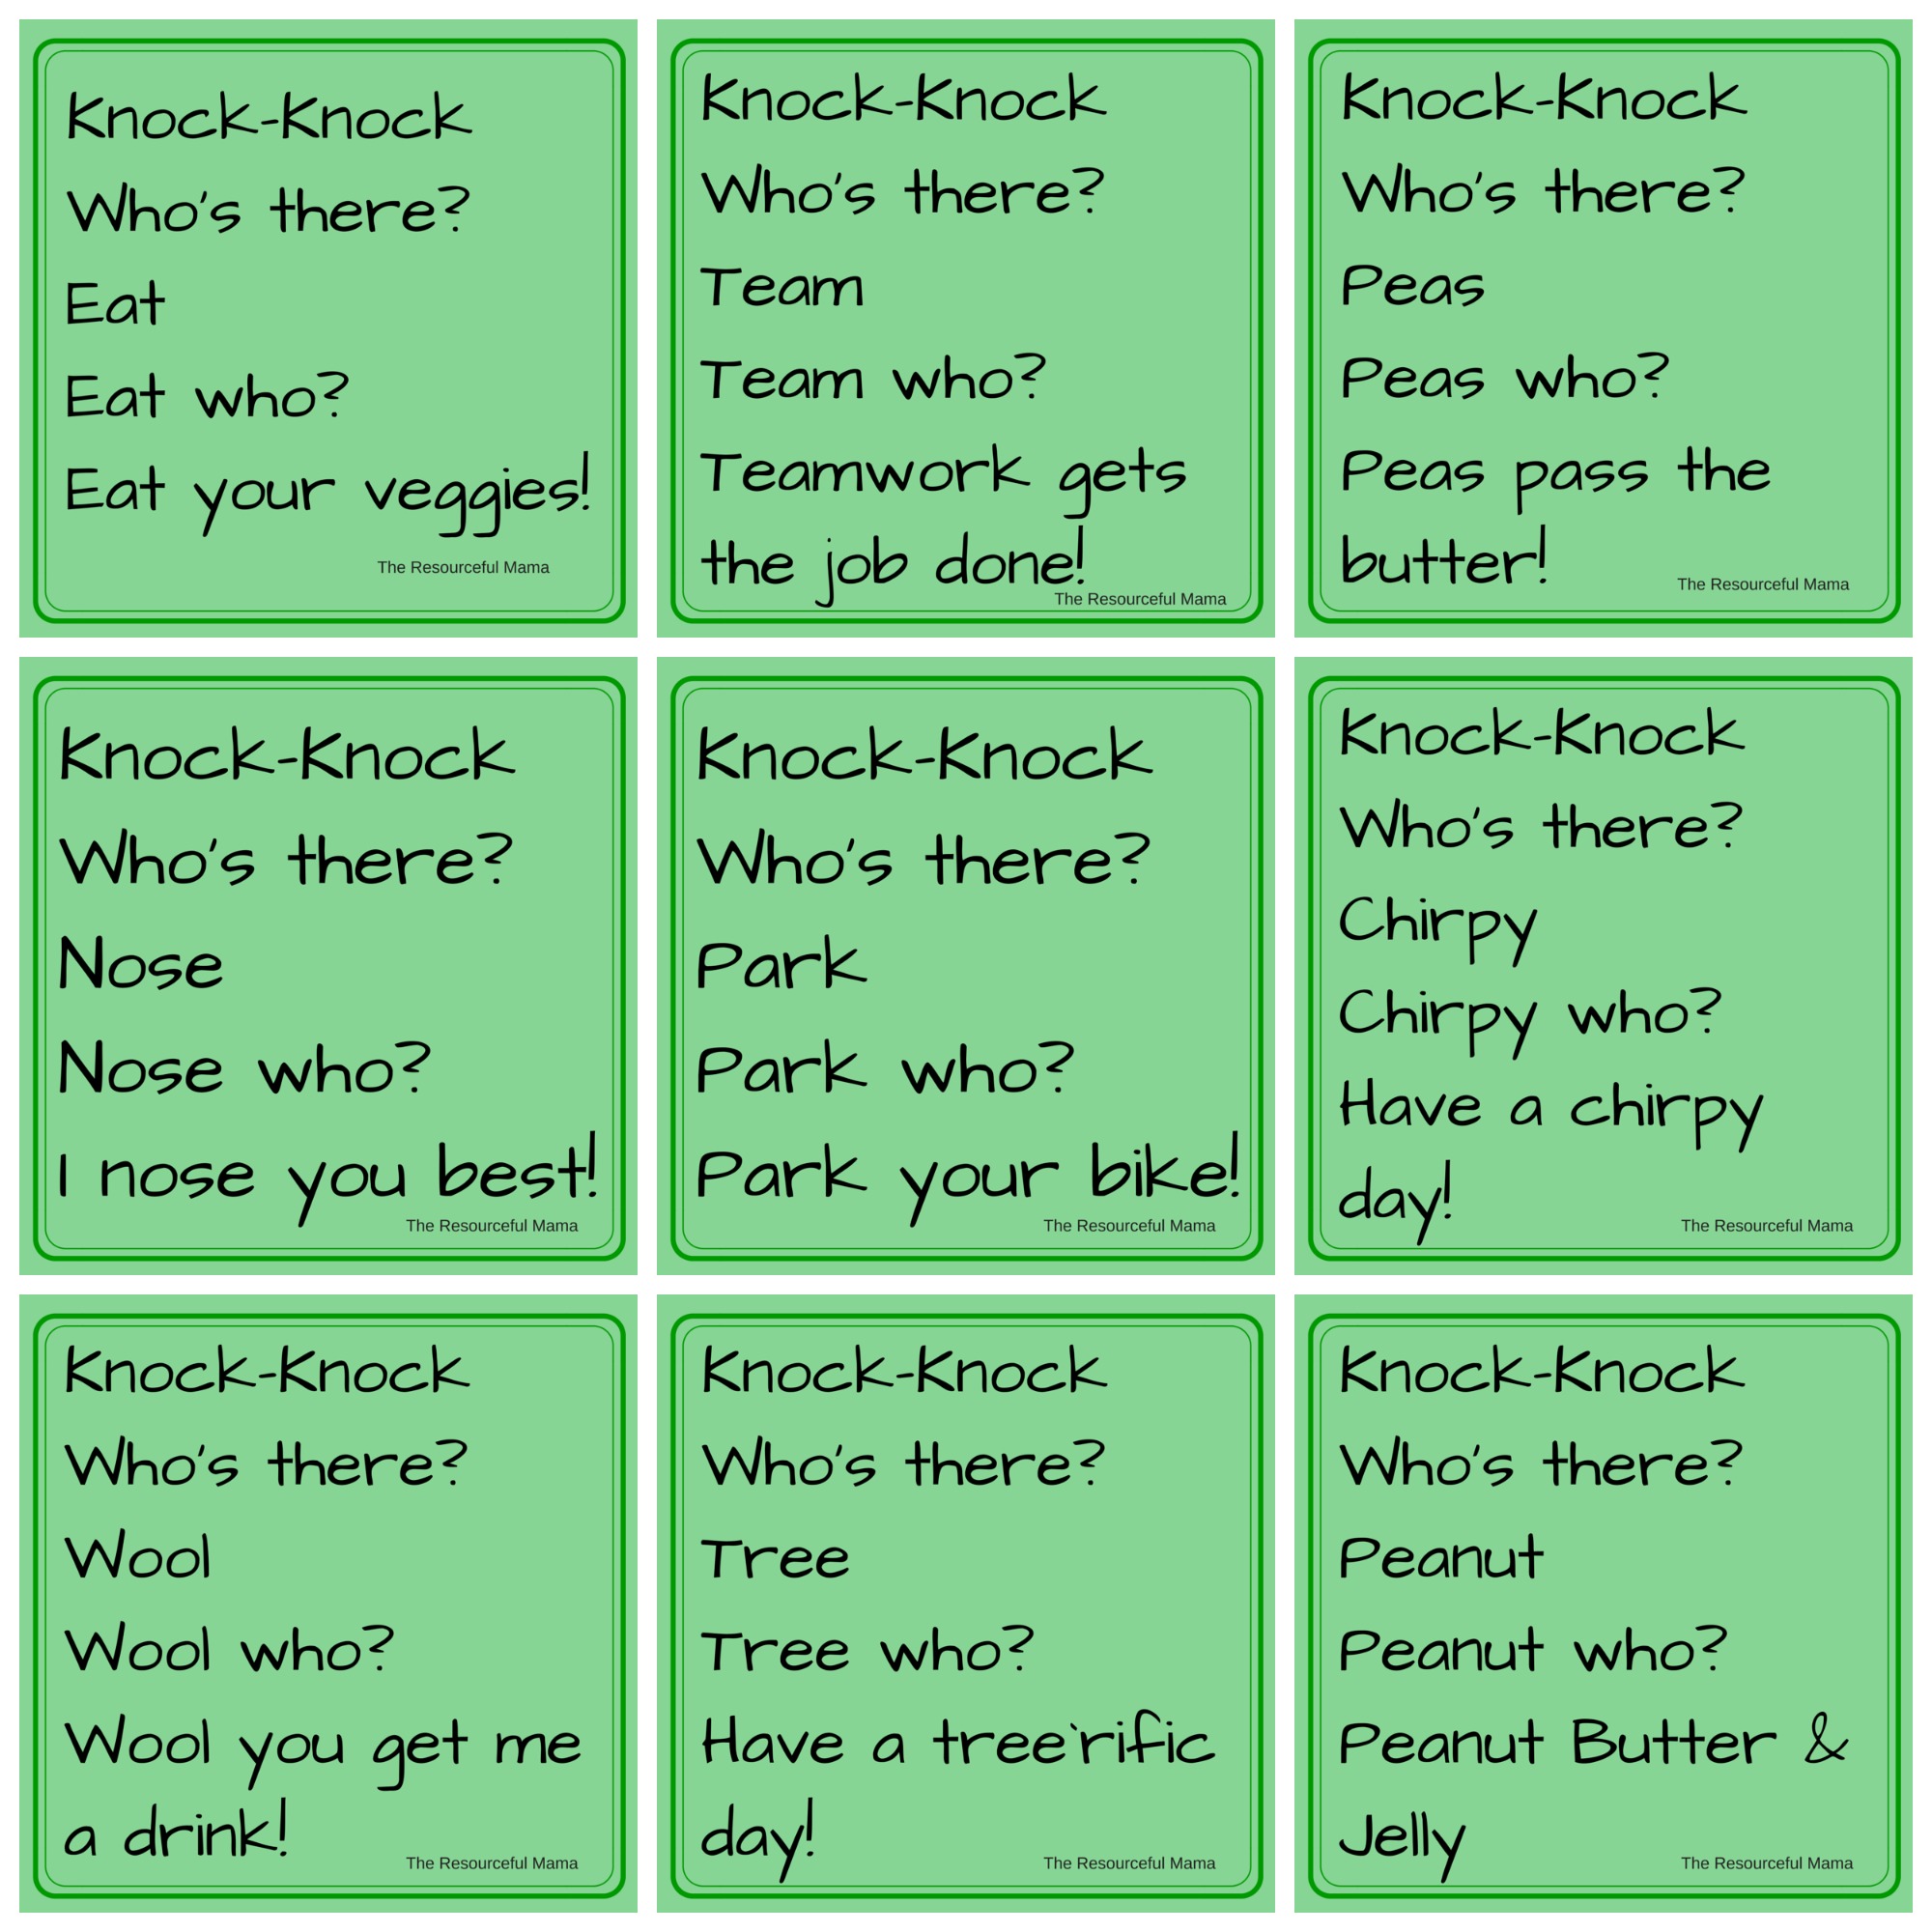 april-fool-s-day-knock-knock-jokes-for-kids-the-resourceful-mama